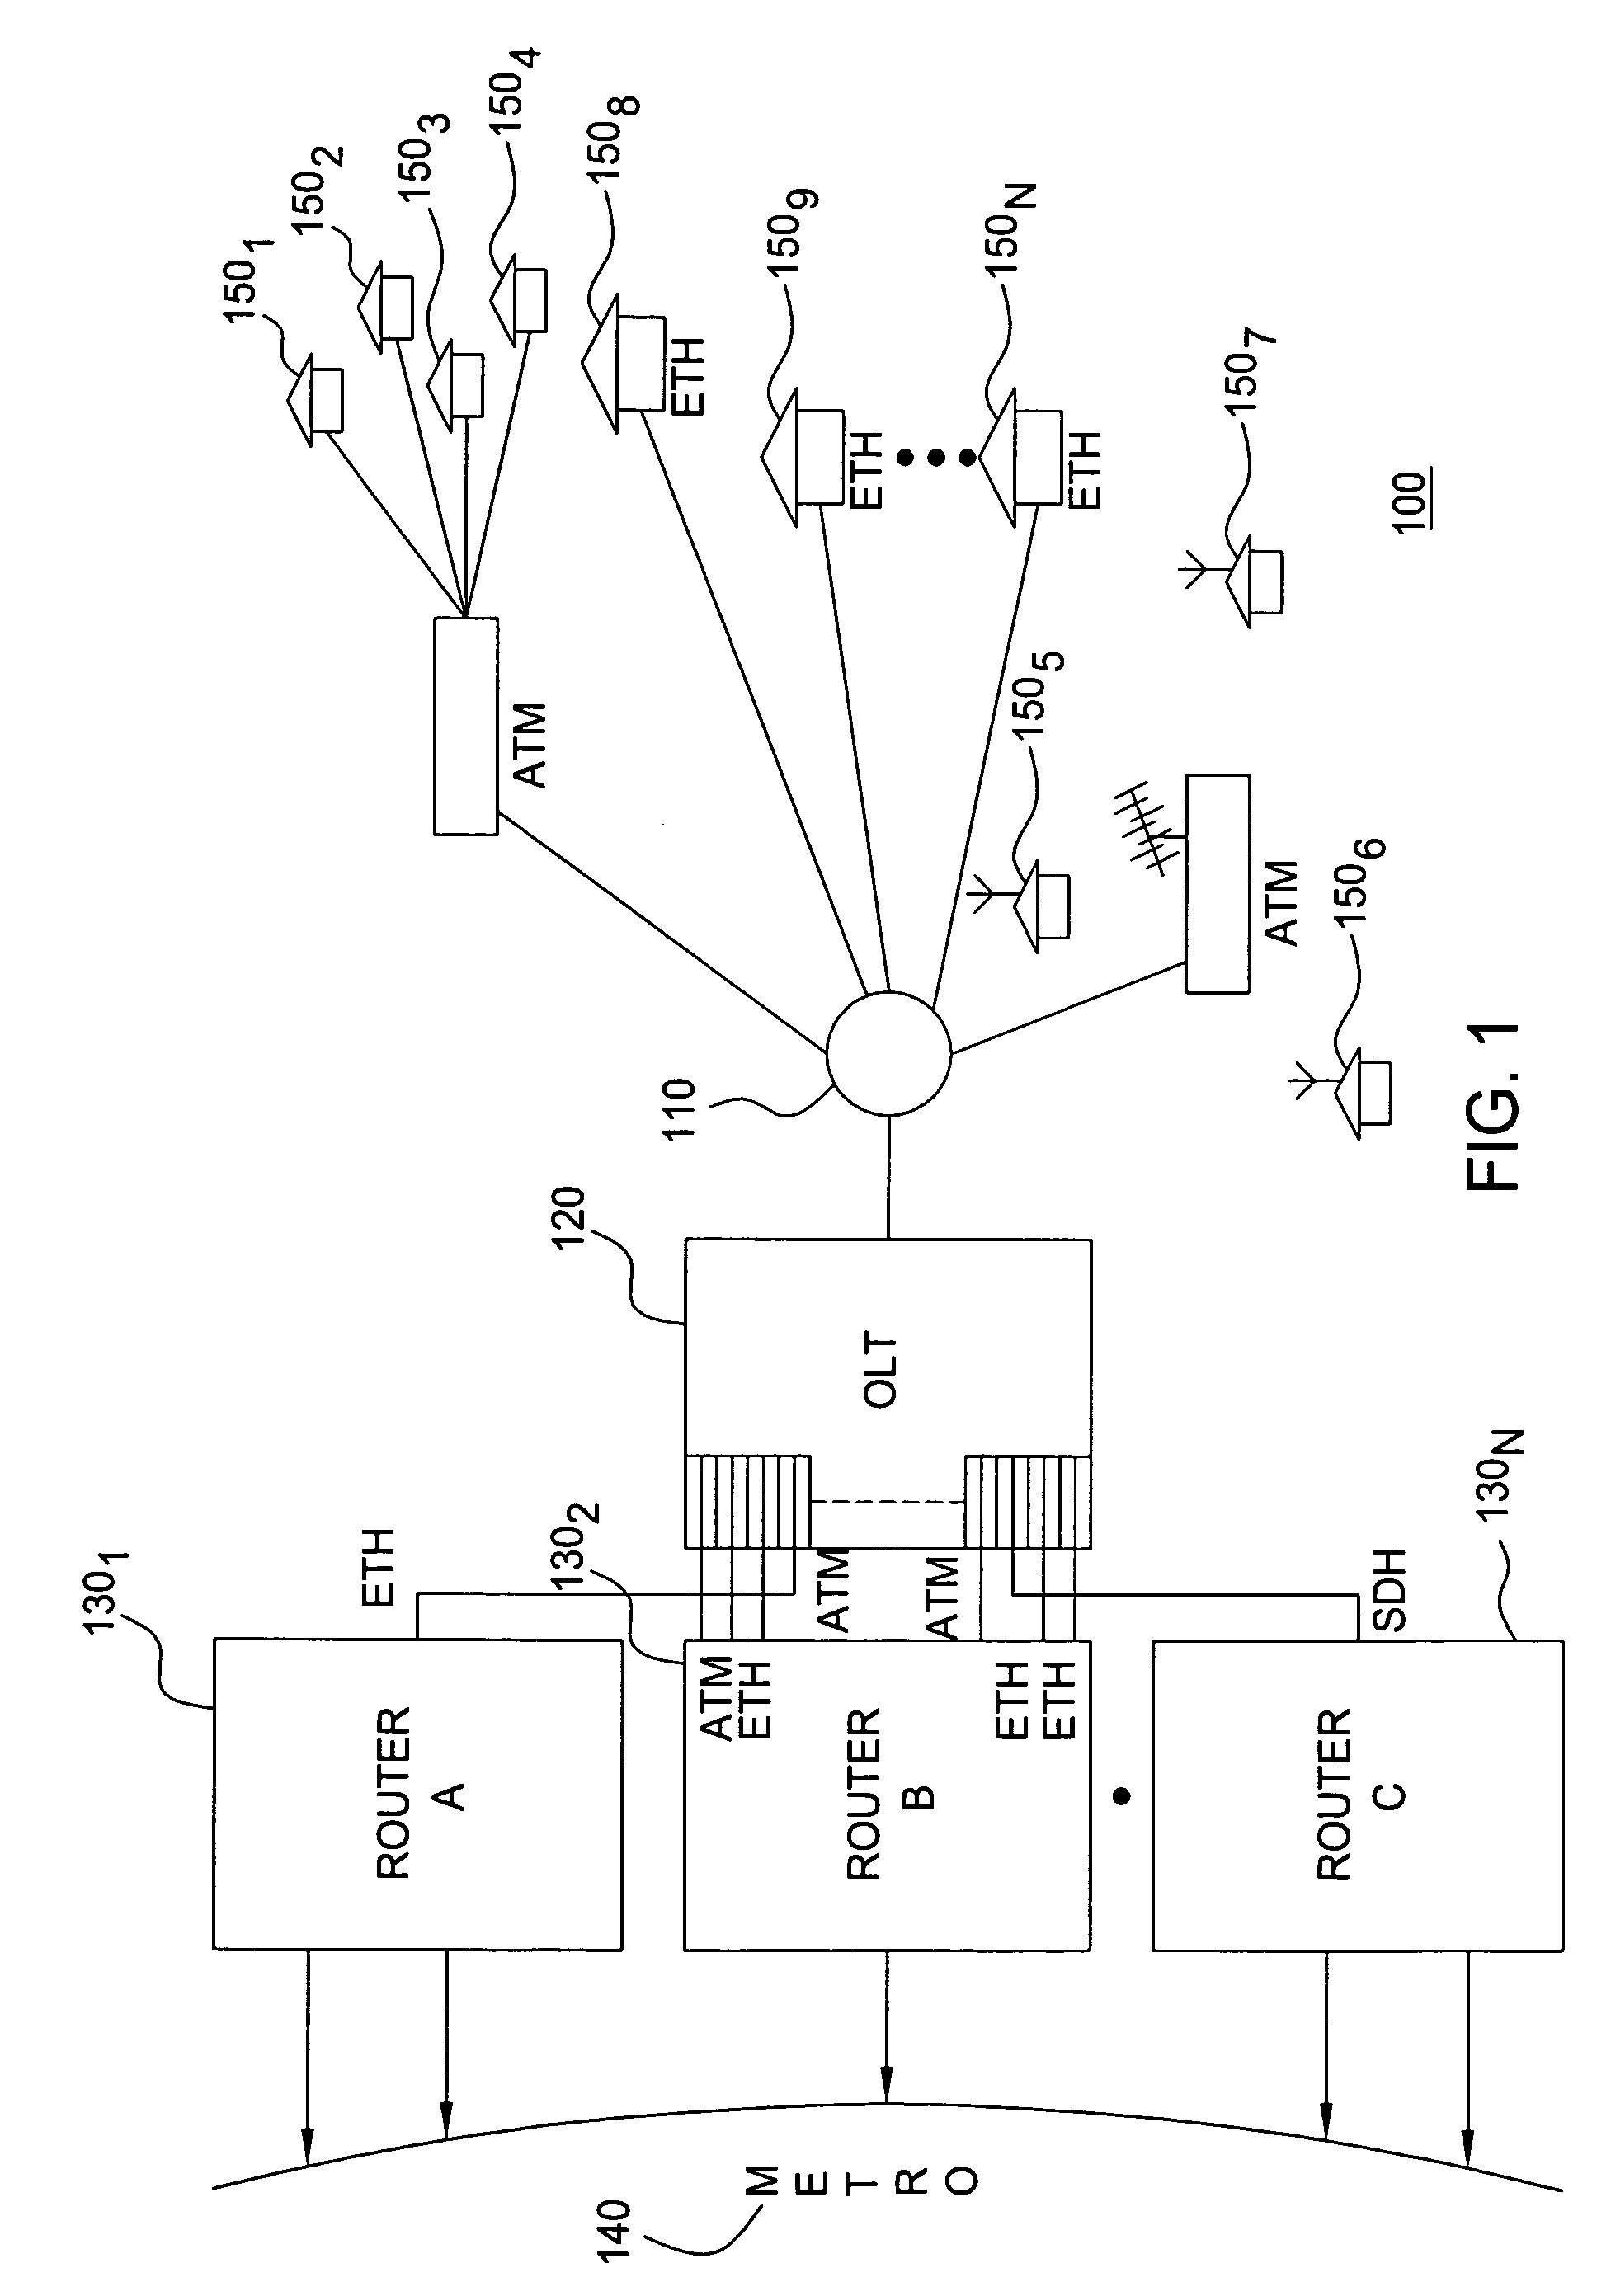 Protocol and line-rate transparent WDM passive optical network